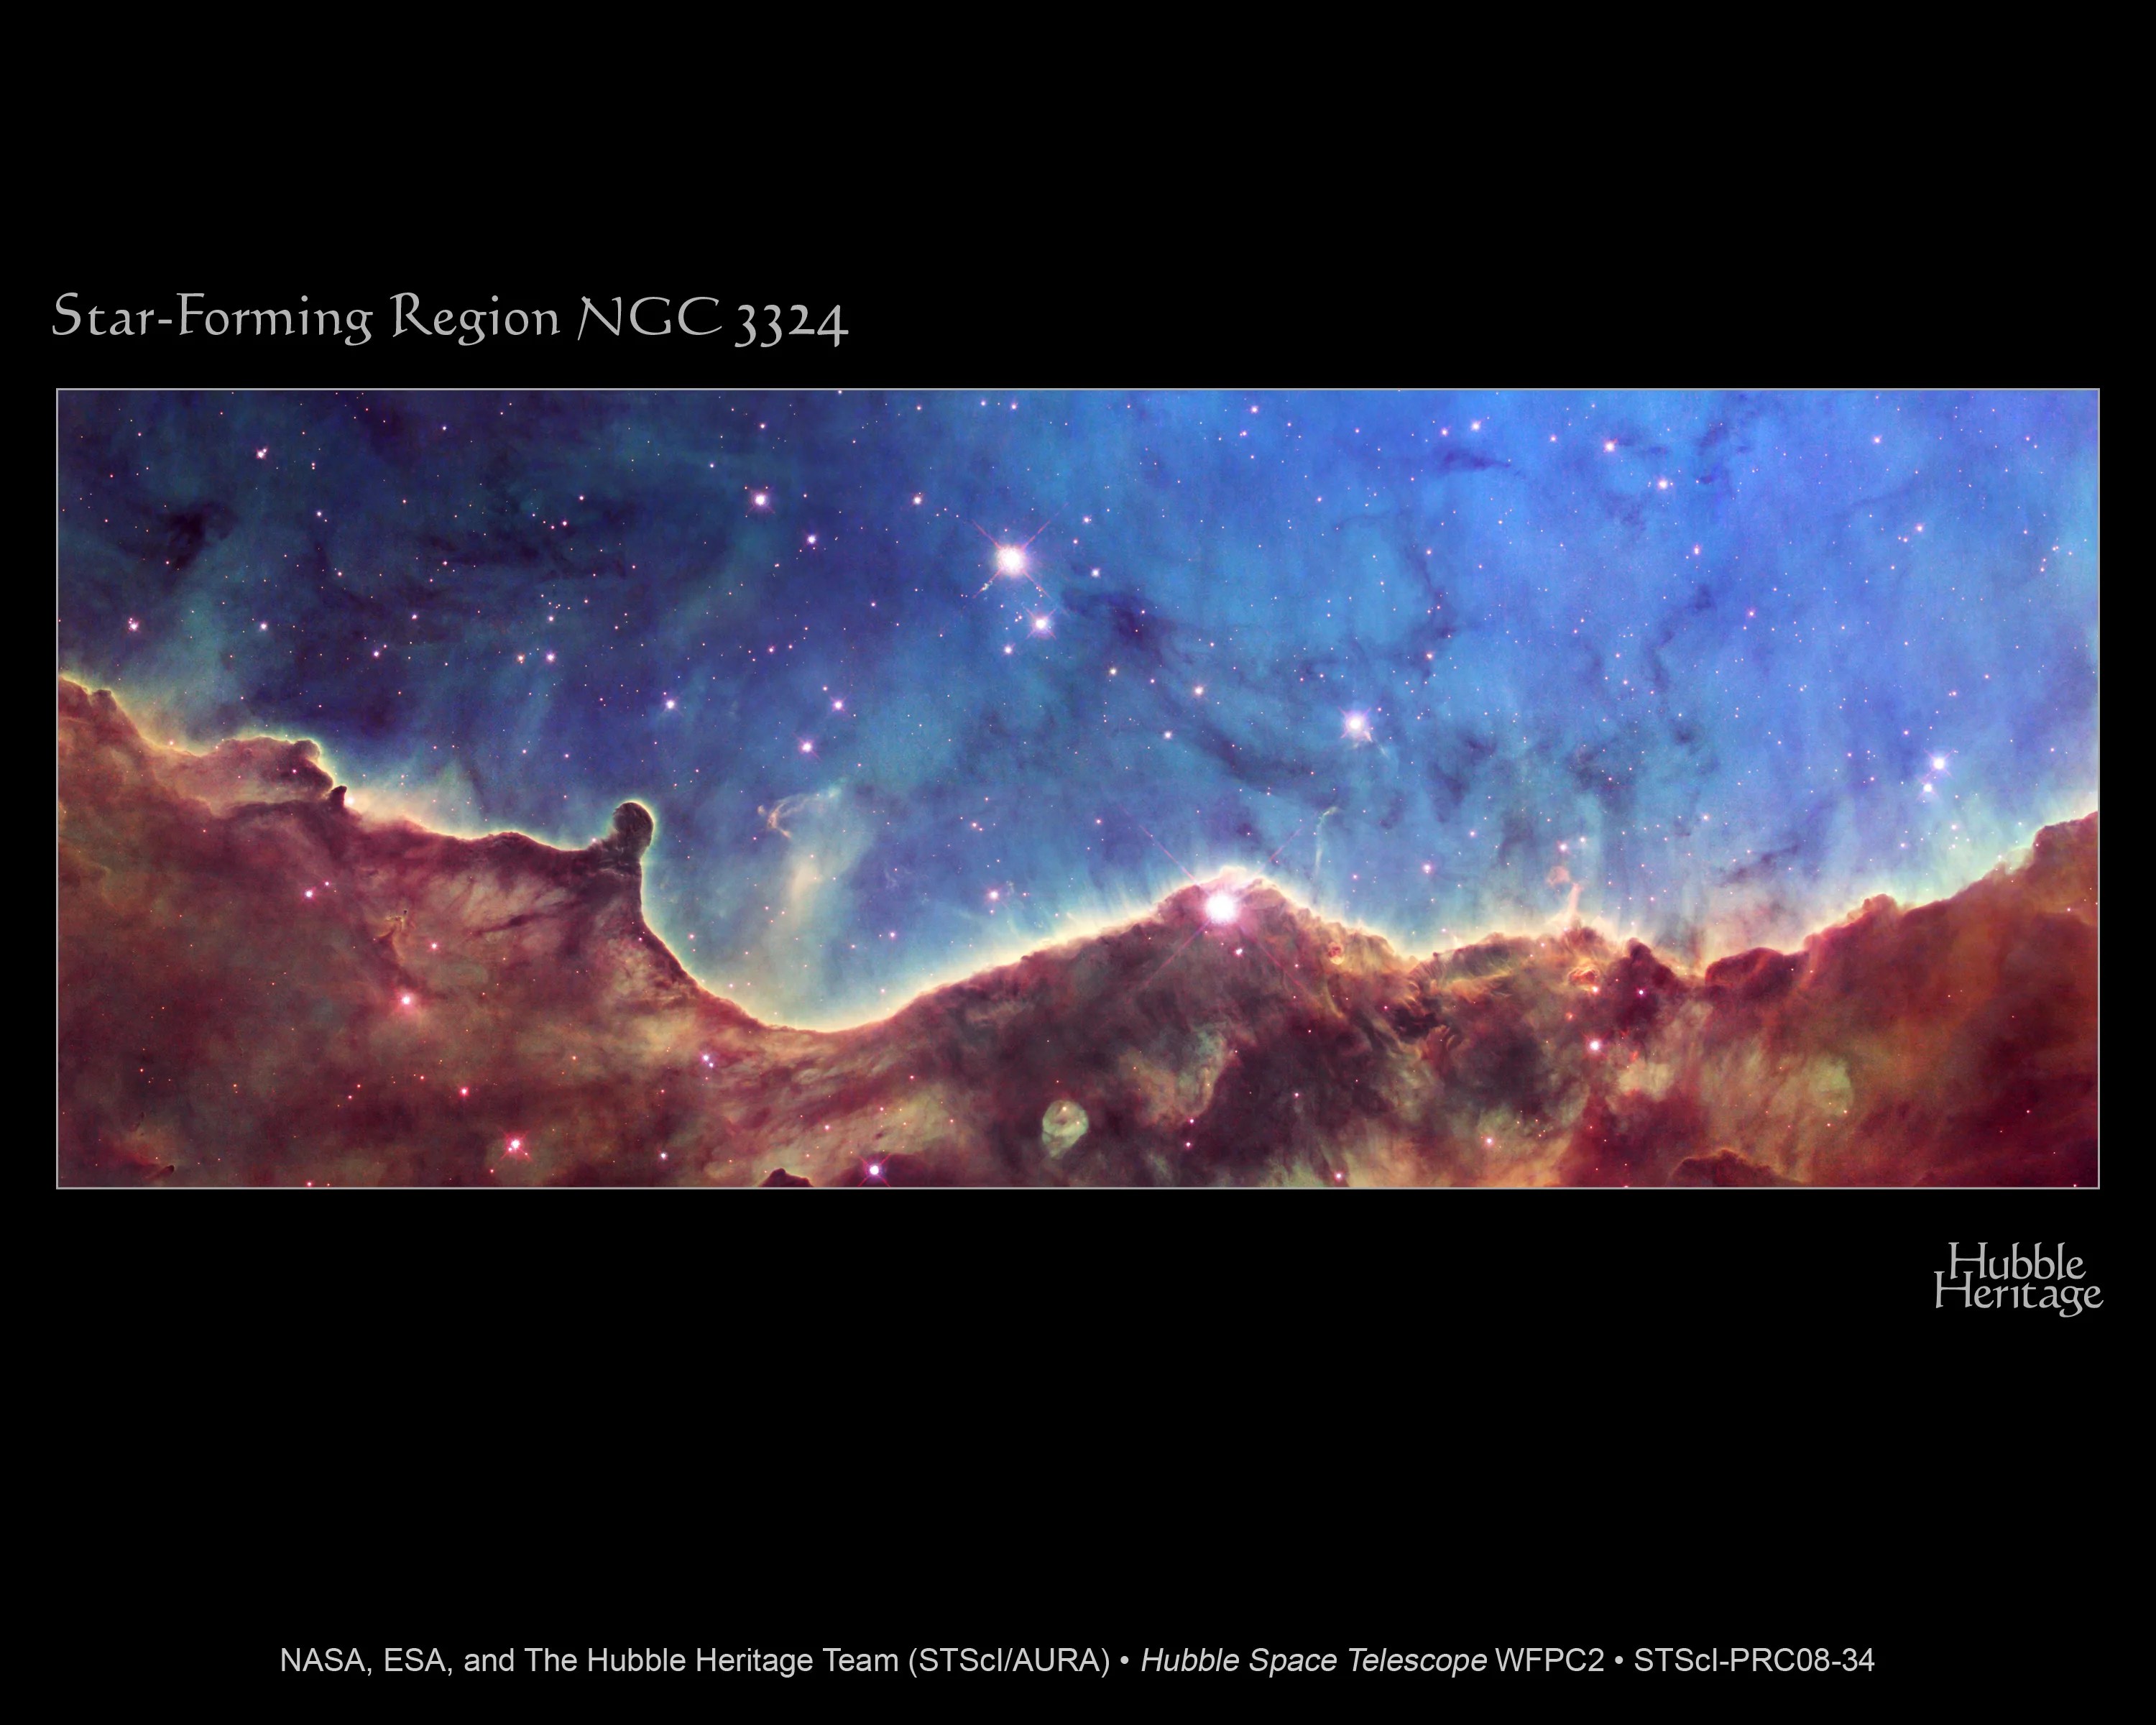 Hubble image of star forming region NGC 3324